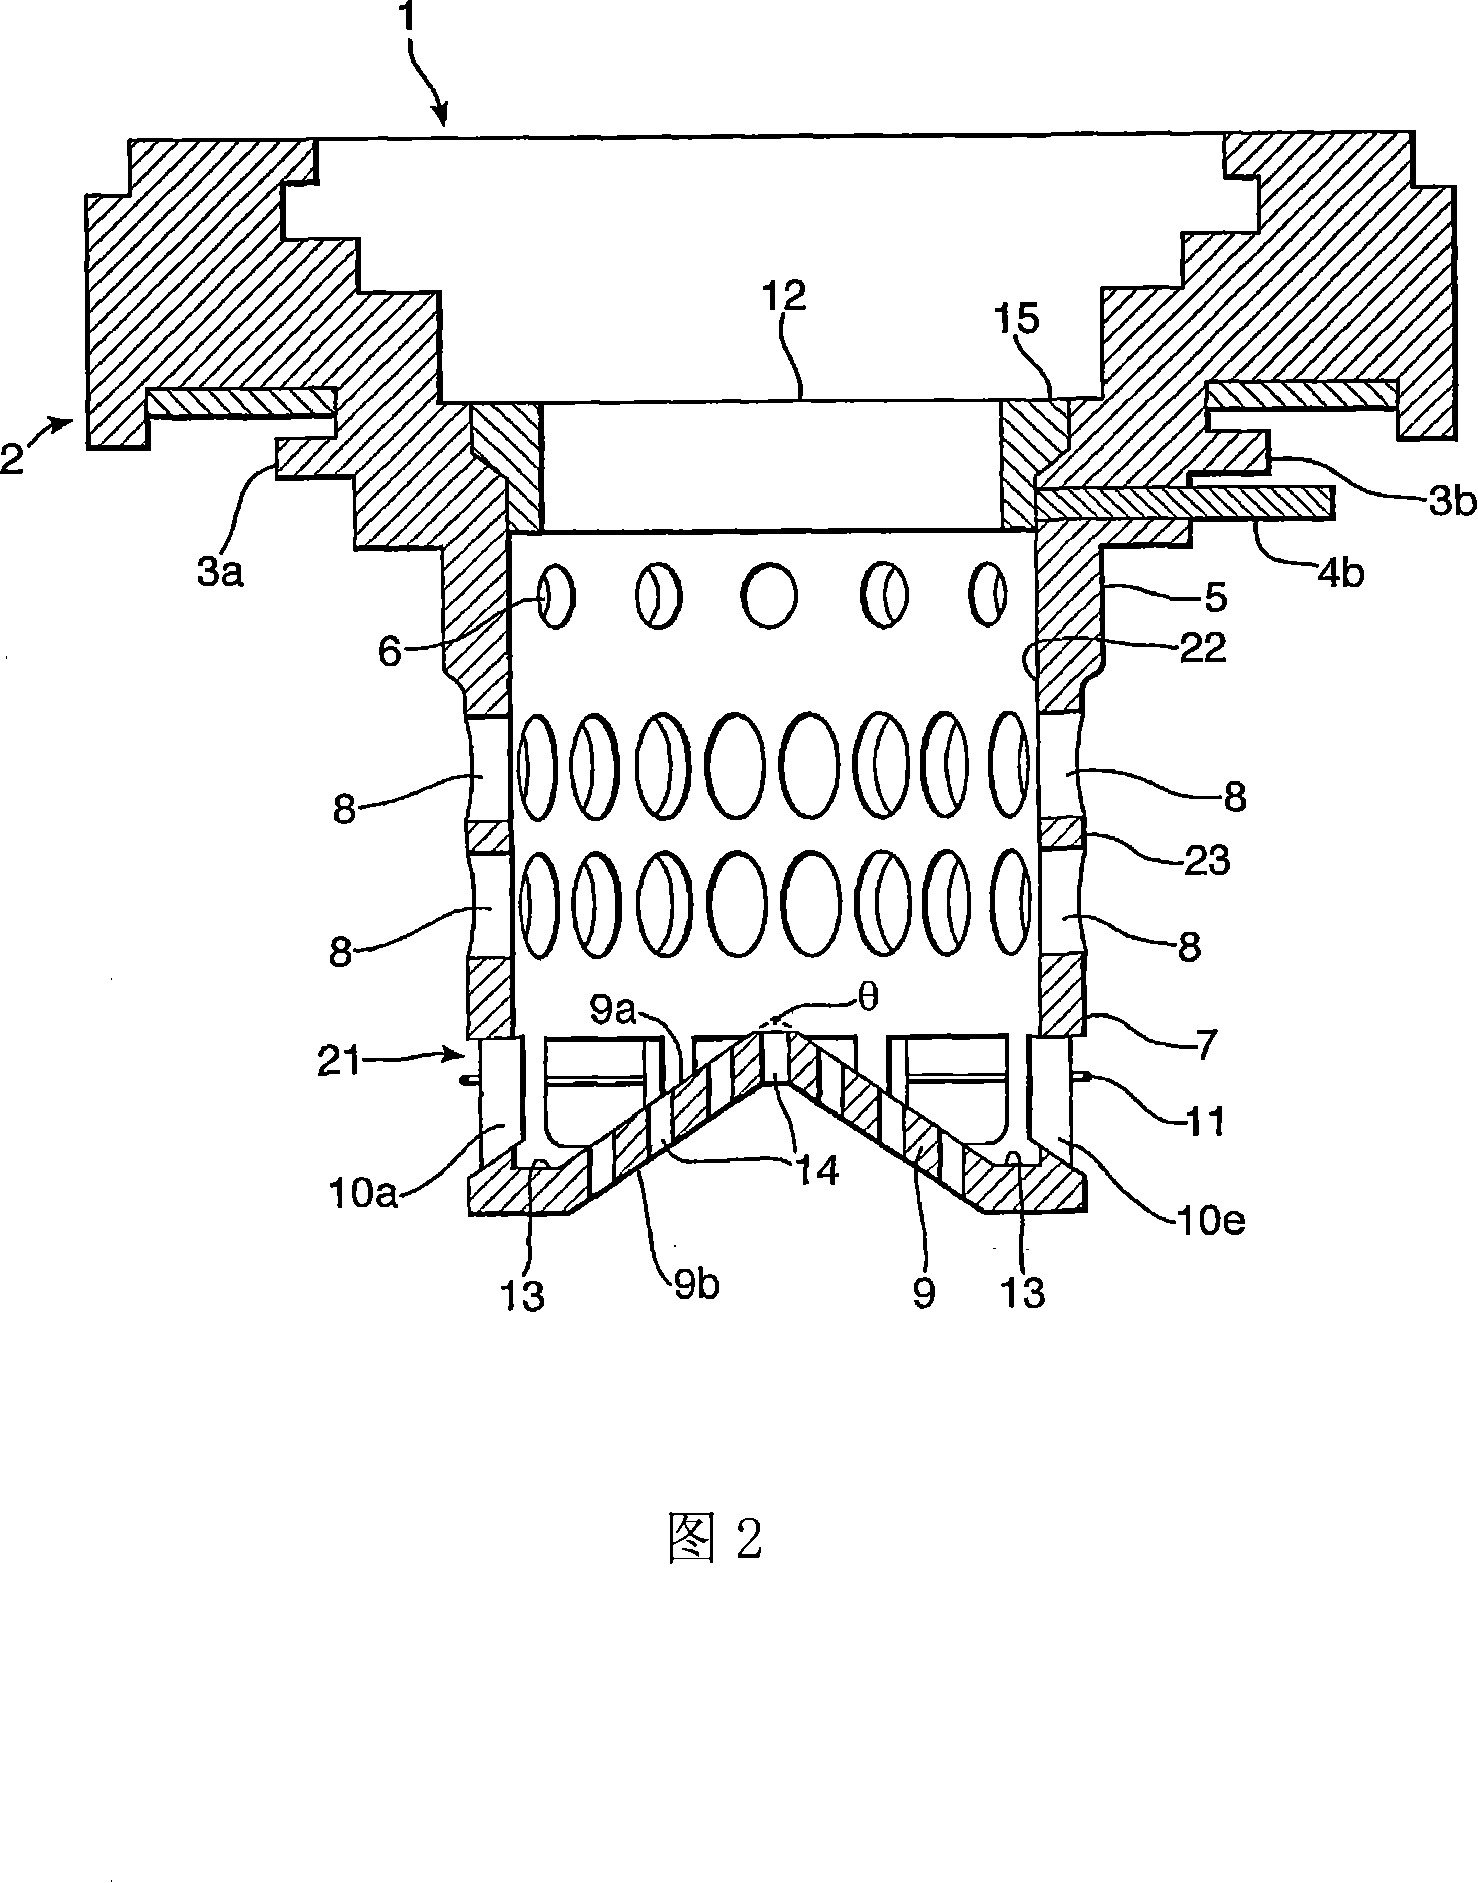 Fuel tank inlet device